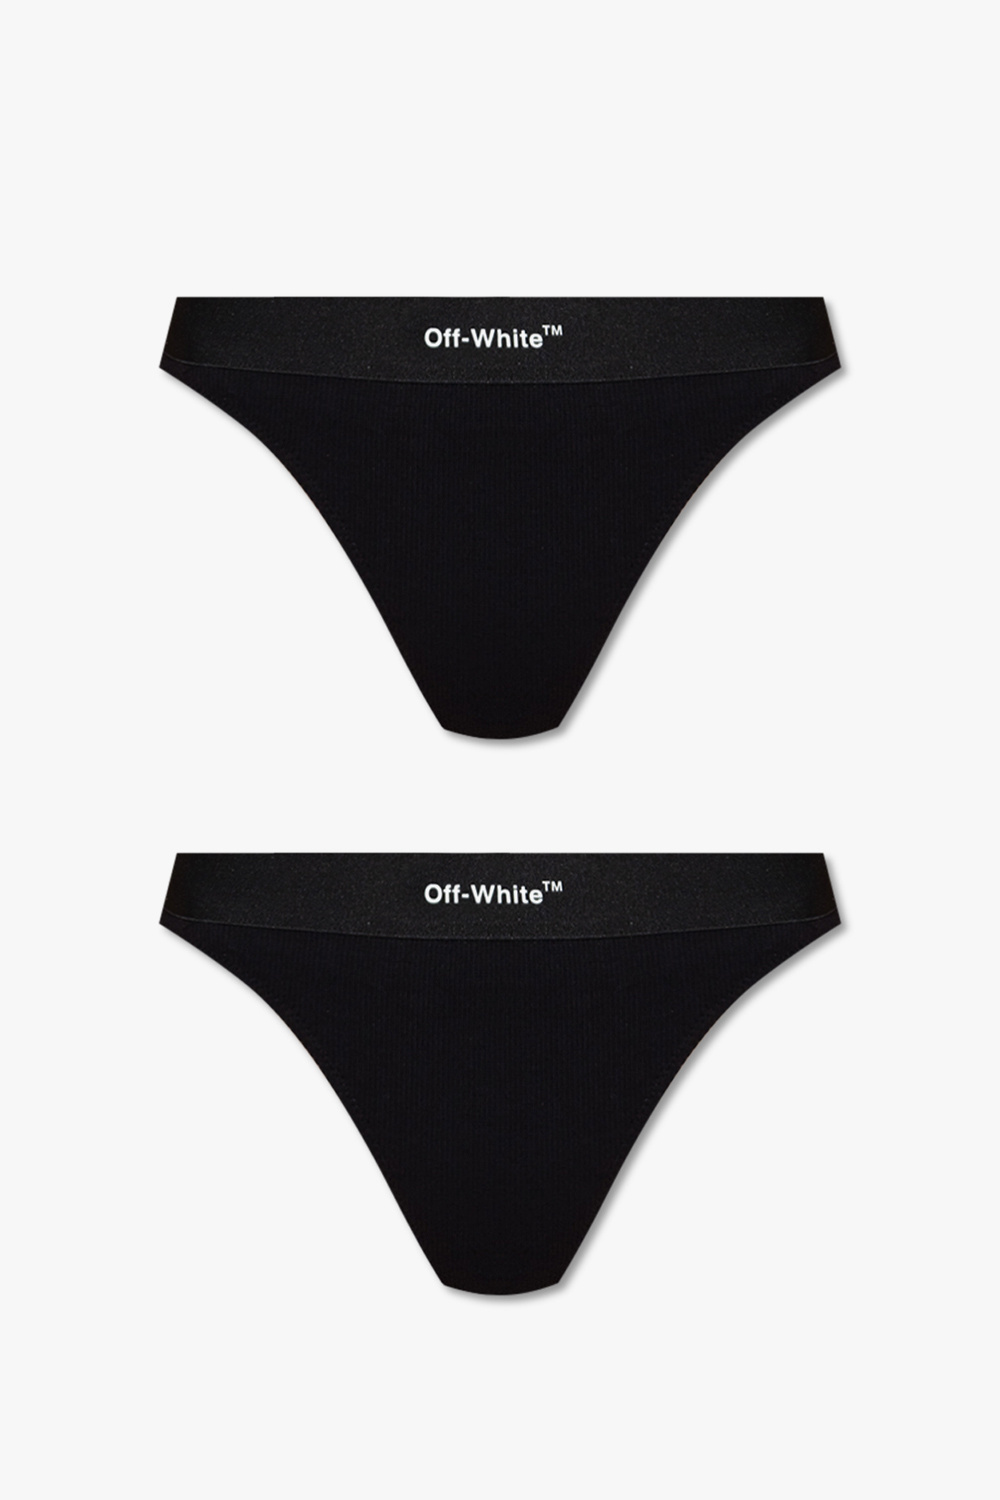 Off-White Branded thong two-pack